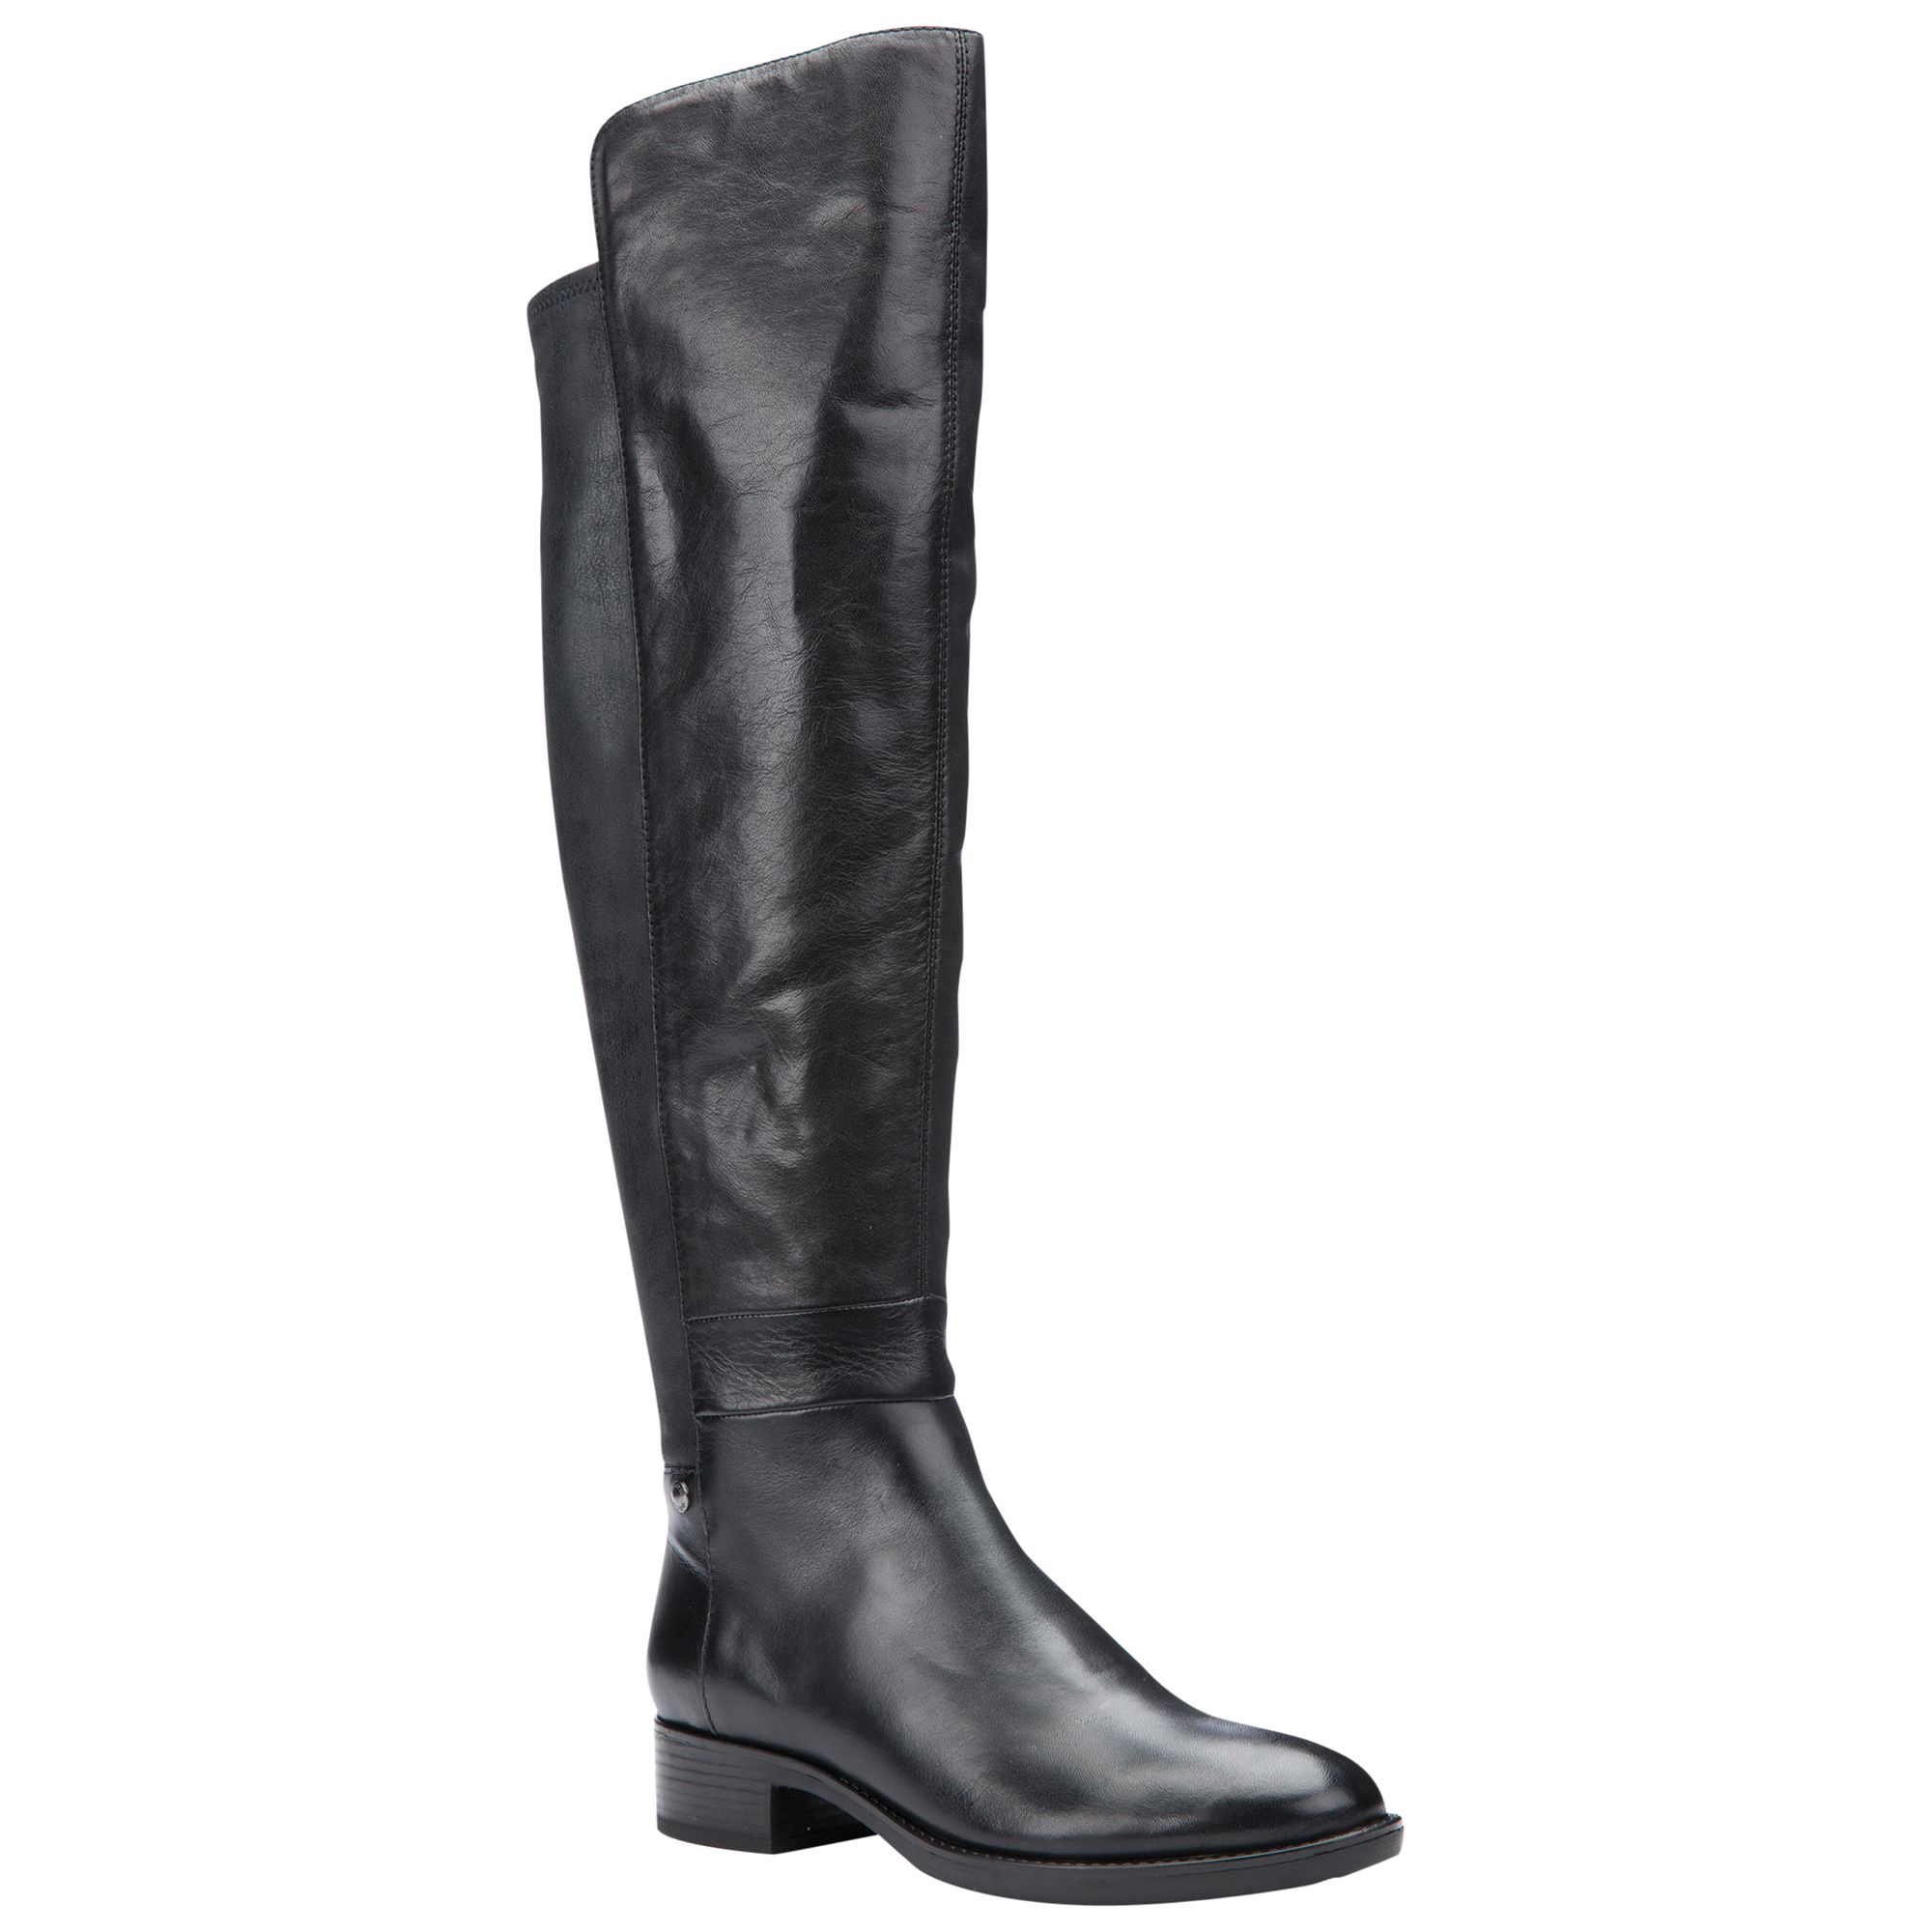 Geox Felicity J Block Heeled Over the Knee Boots, Black Leather, 5.5